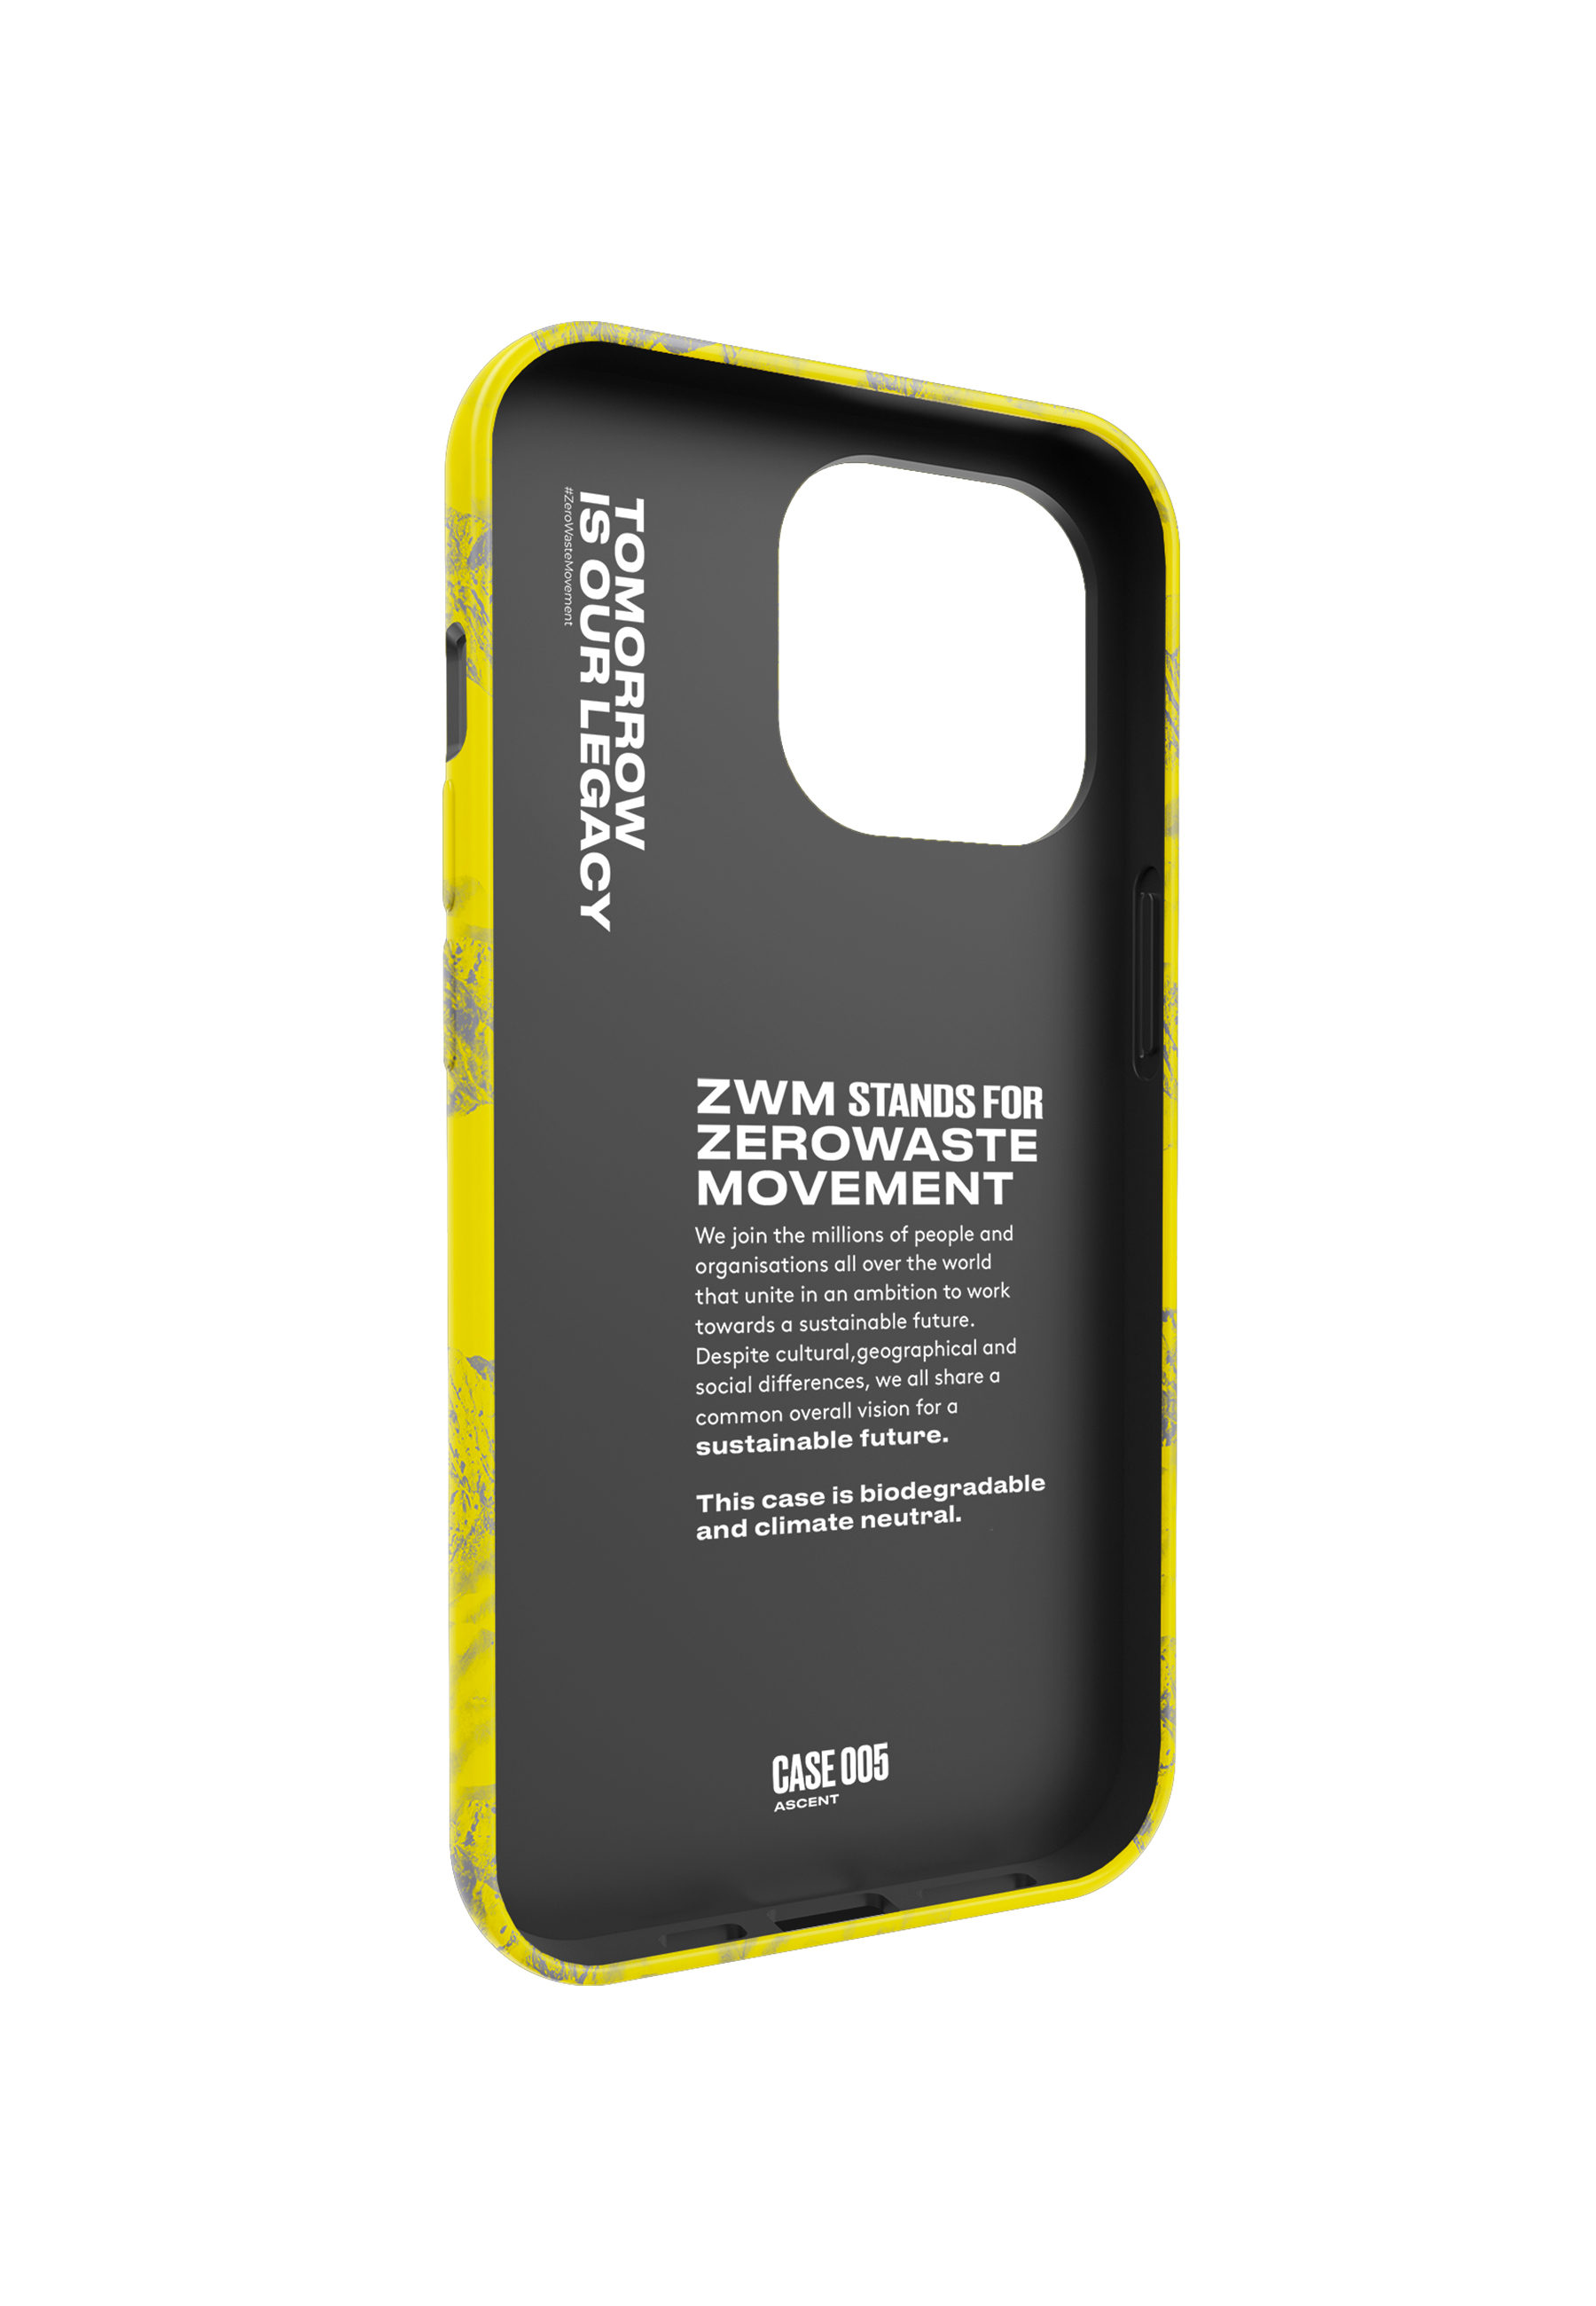 Apple, _13PM, iPhone Backcover, ZWM Pro, 12/12 yellow/black